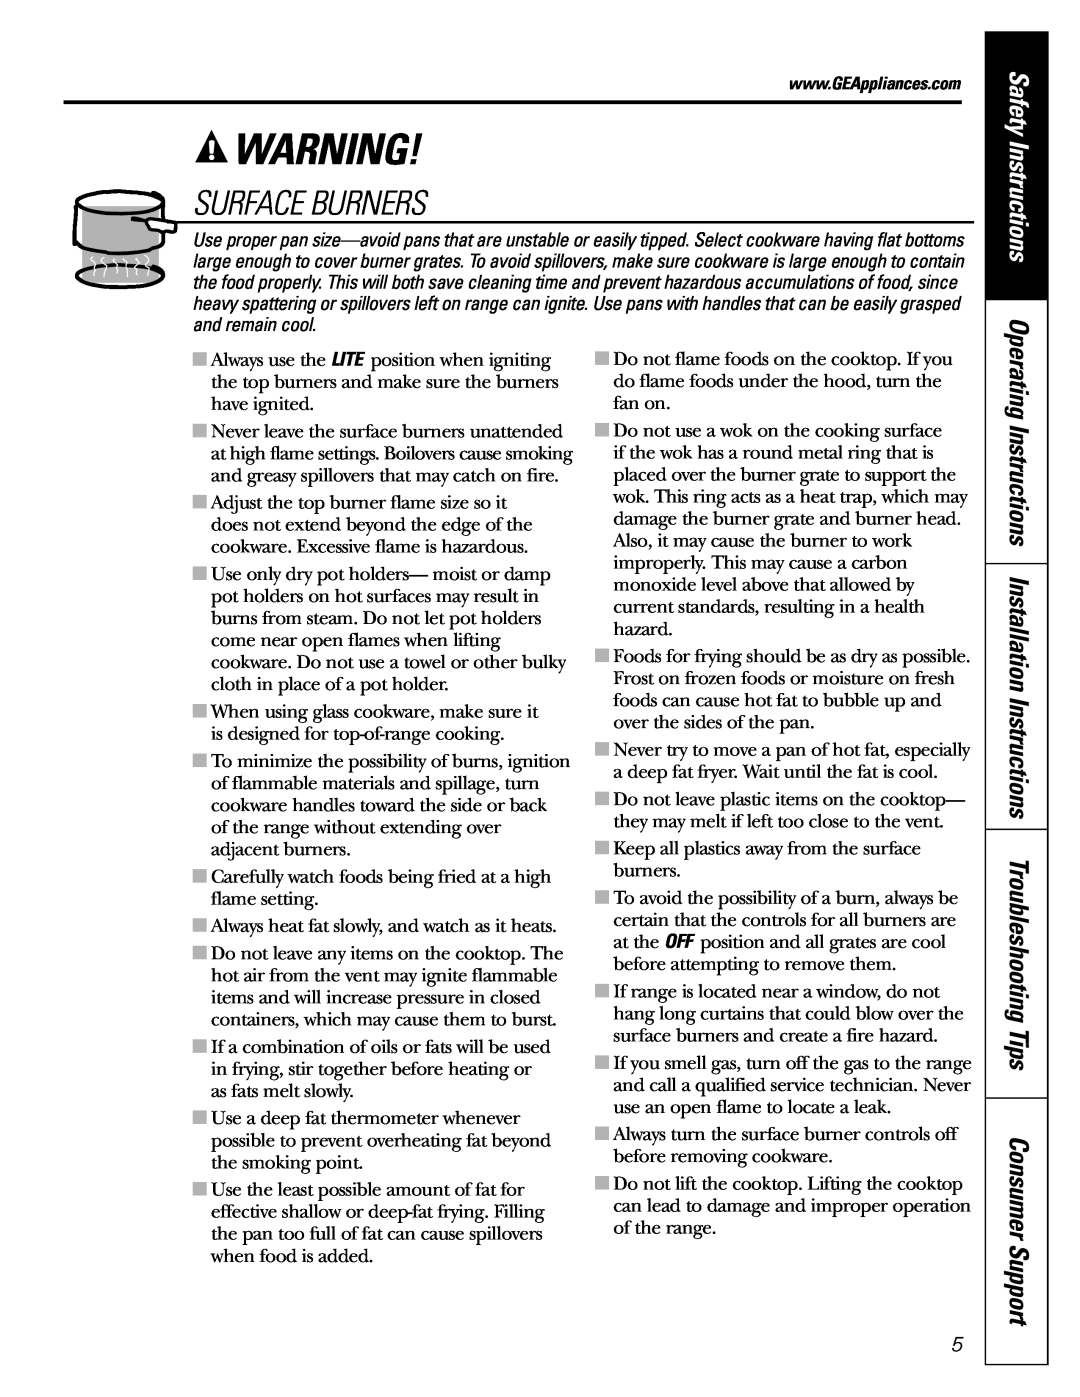 GE JGB920 installation instructions Surface Burners, Safety Instructions 